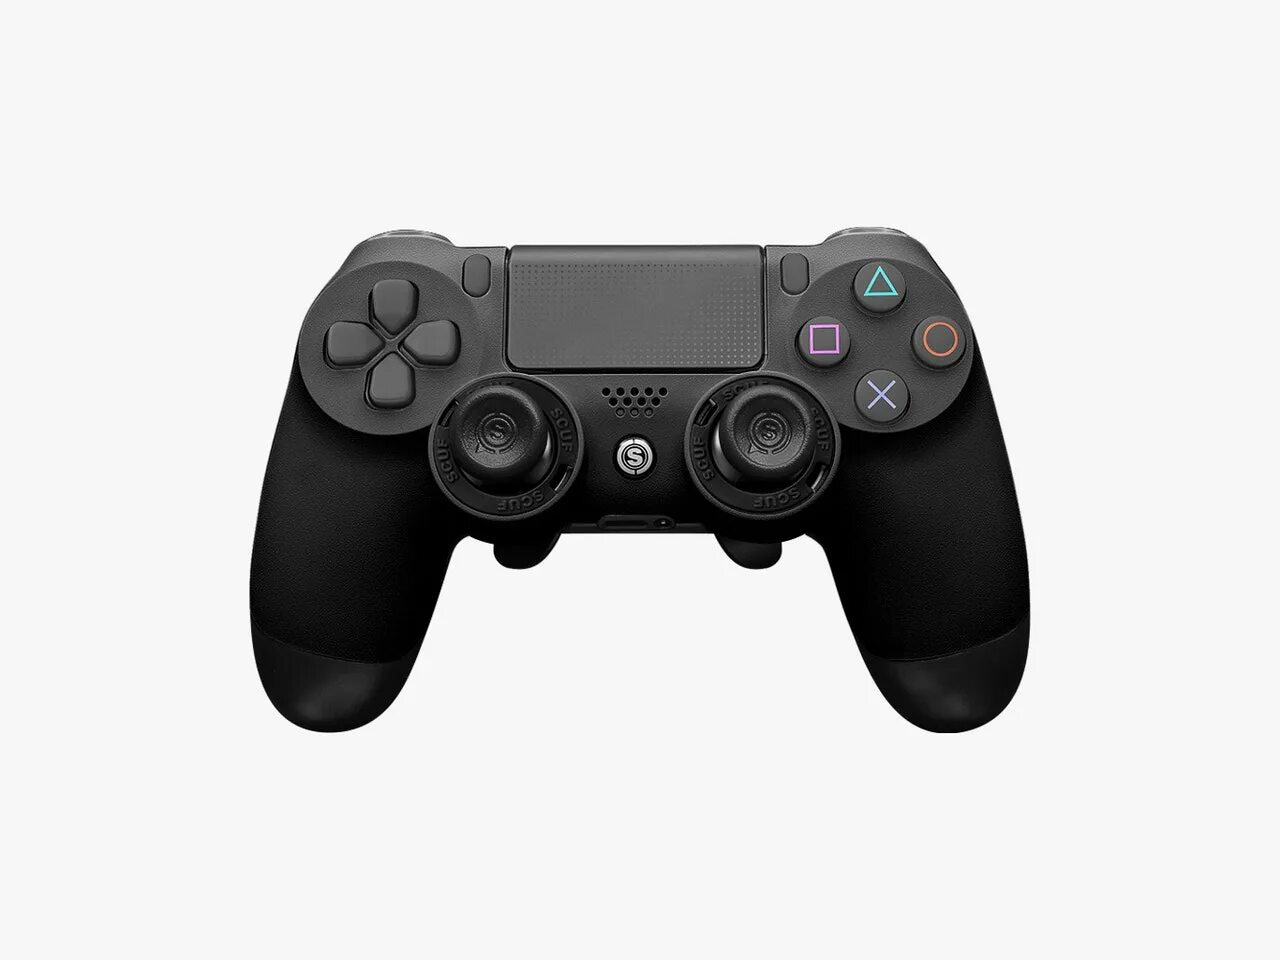 Эмулятор джойстика ps4. PLAYSTATION 4 Controller. Ps4 Gamepad. Ps5 Pro Controller.